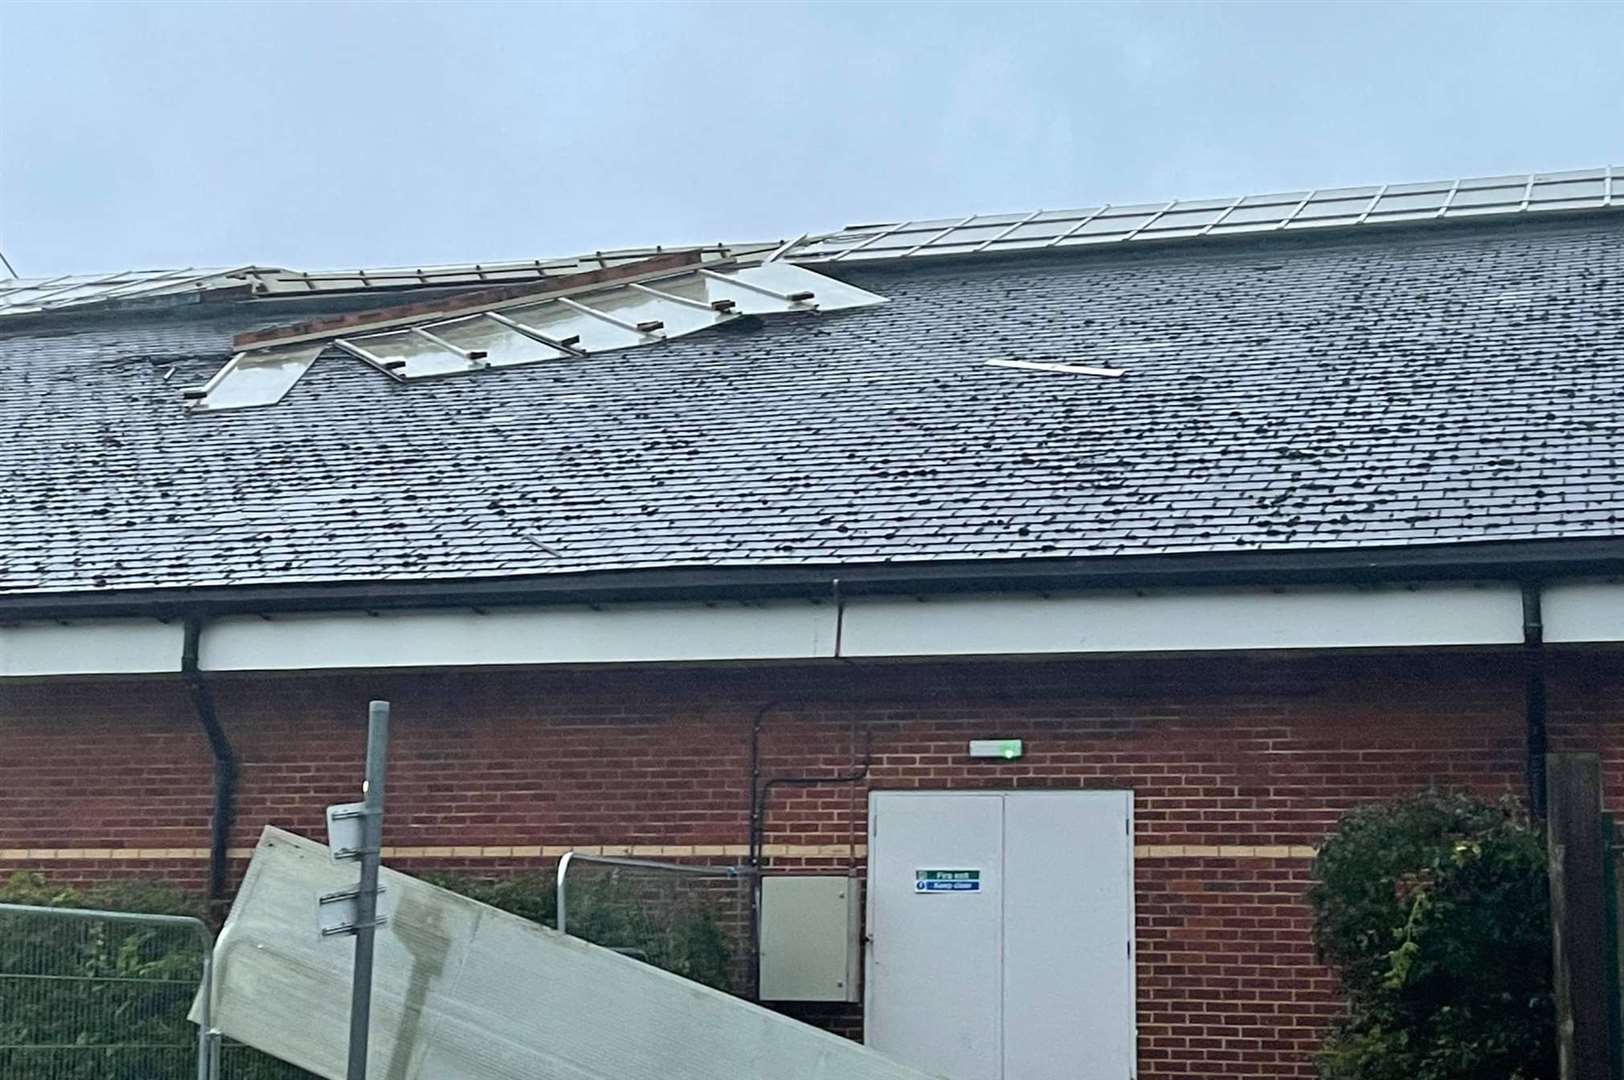 Storms caused severe damage to the roof last year. Photo: Tenterden Leisure Centre